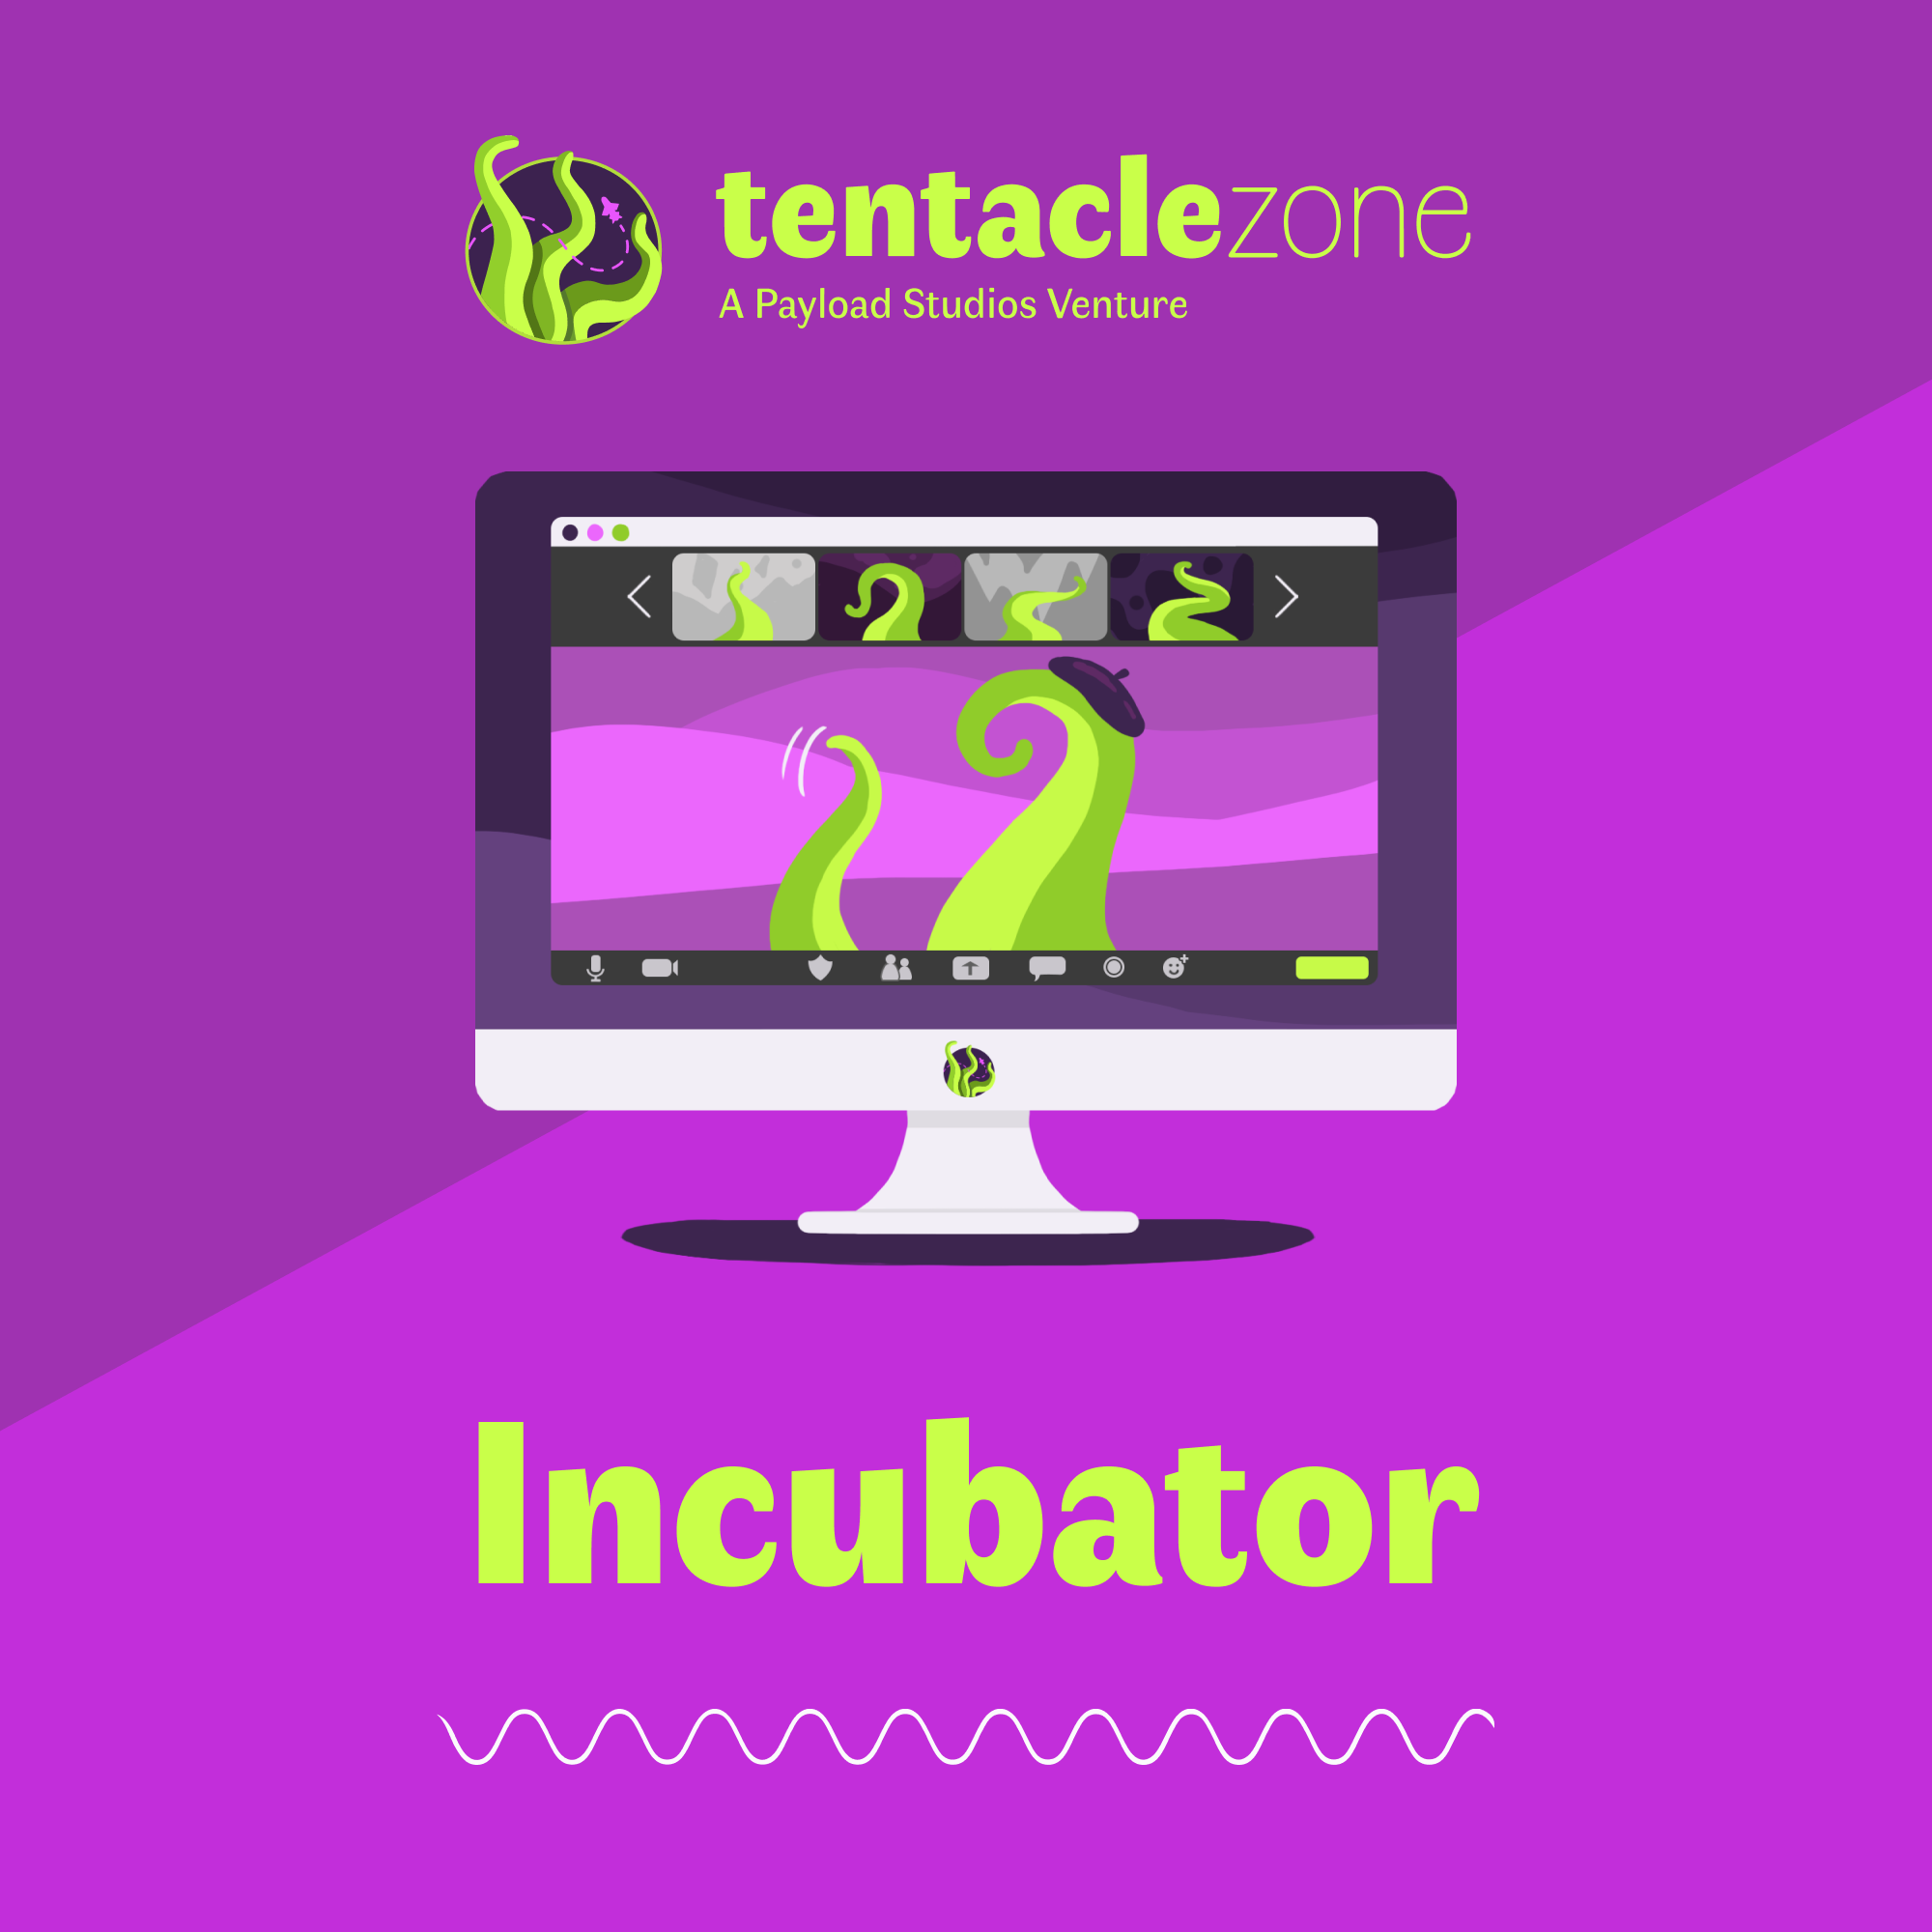 <img src="Payload Studios_Tentacle Zone Incubator Logo_ 2000x2000px.png" alt="Image of the Tentacle Zone Incubator Logo">